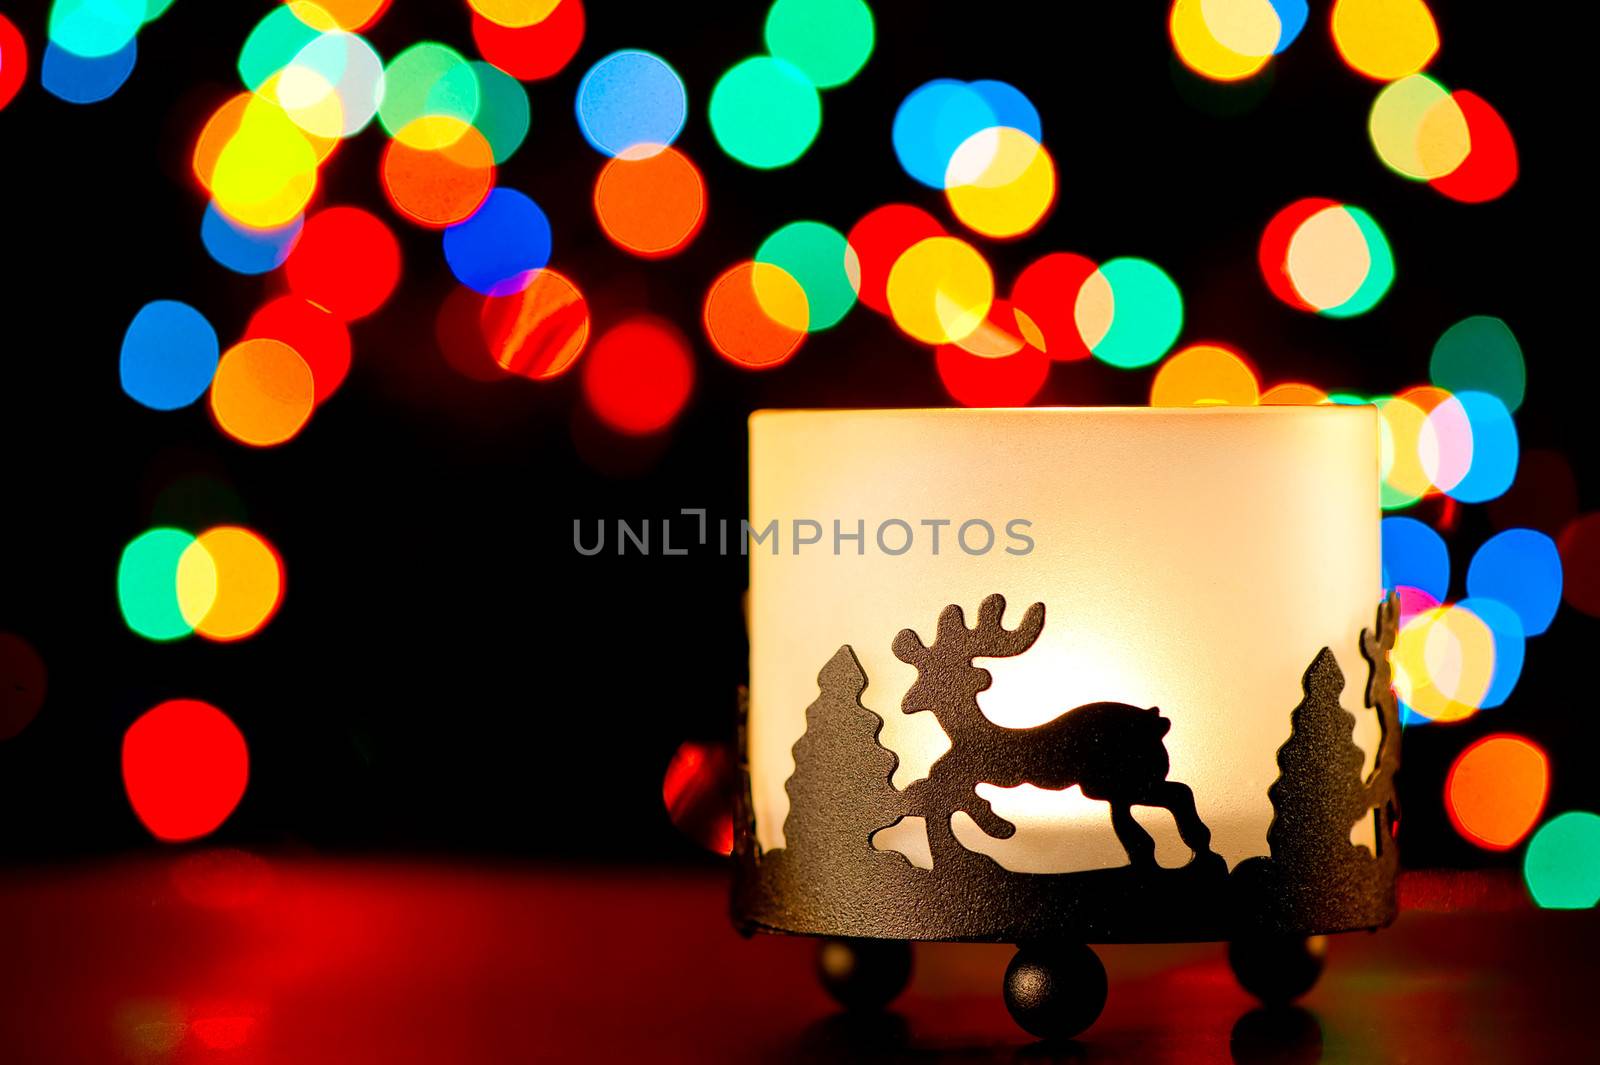 Candlestick with a figure of a deer on the background of blurred lights garlands.